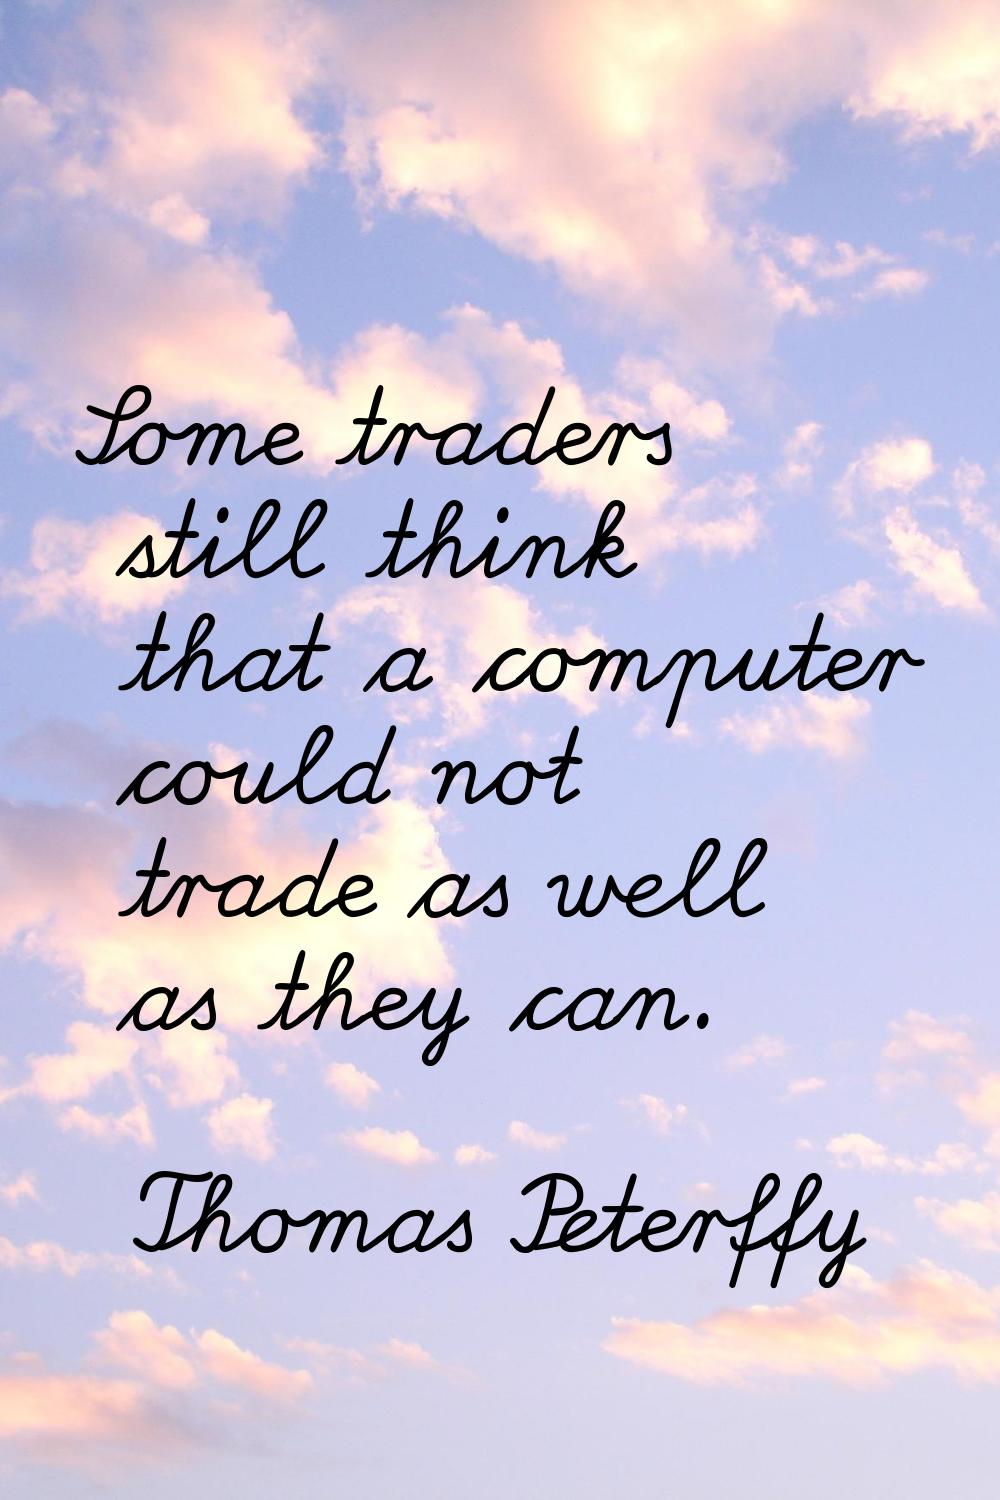 Some traders still think that a computer could not trade as well as they can.